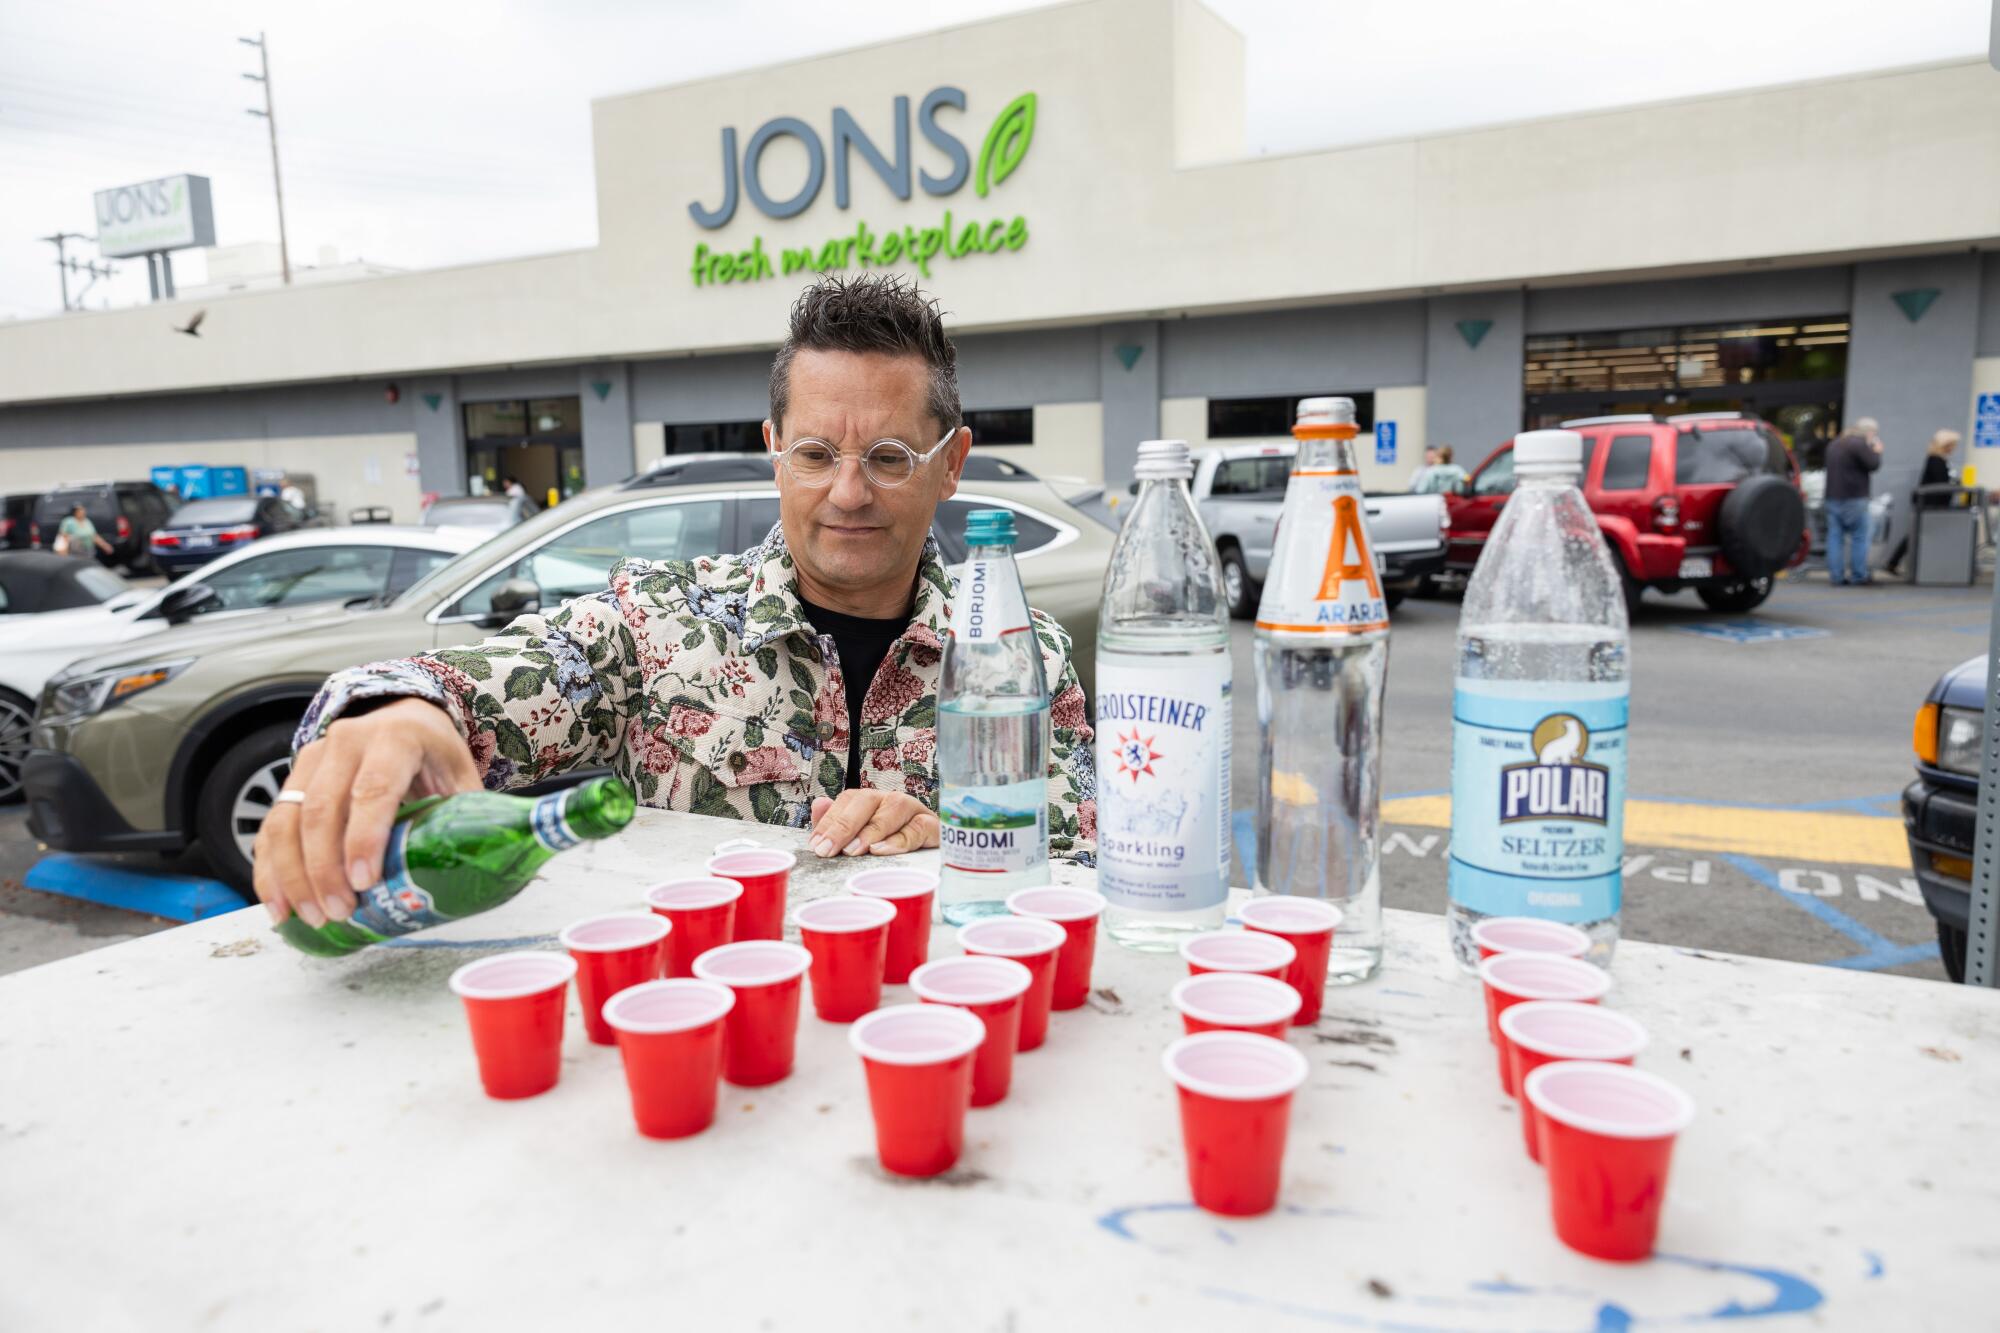 A man pouring water into tiny red Solo cups in the parking lot of a grocery store.